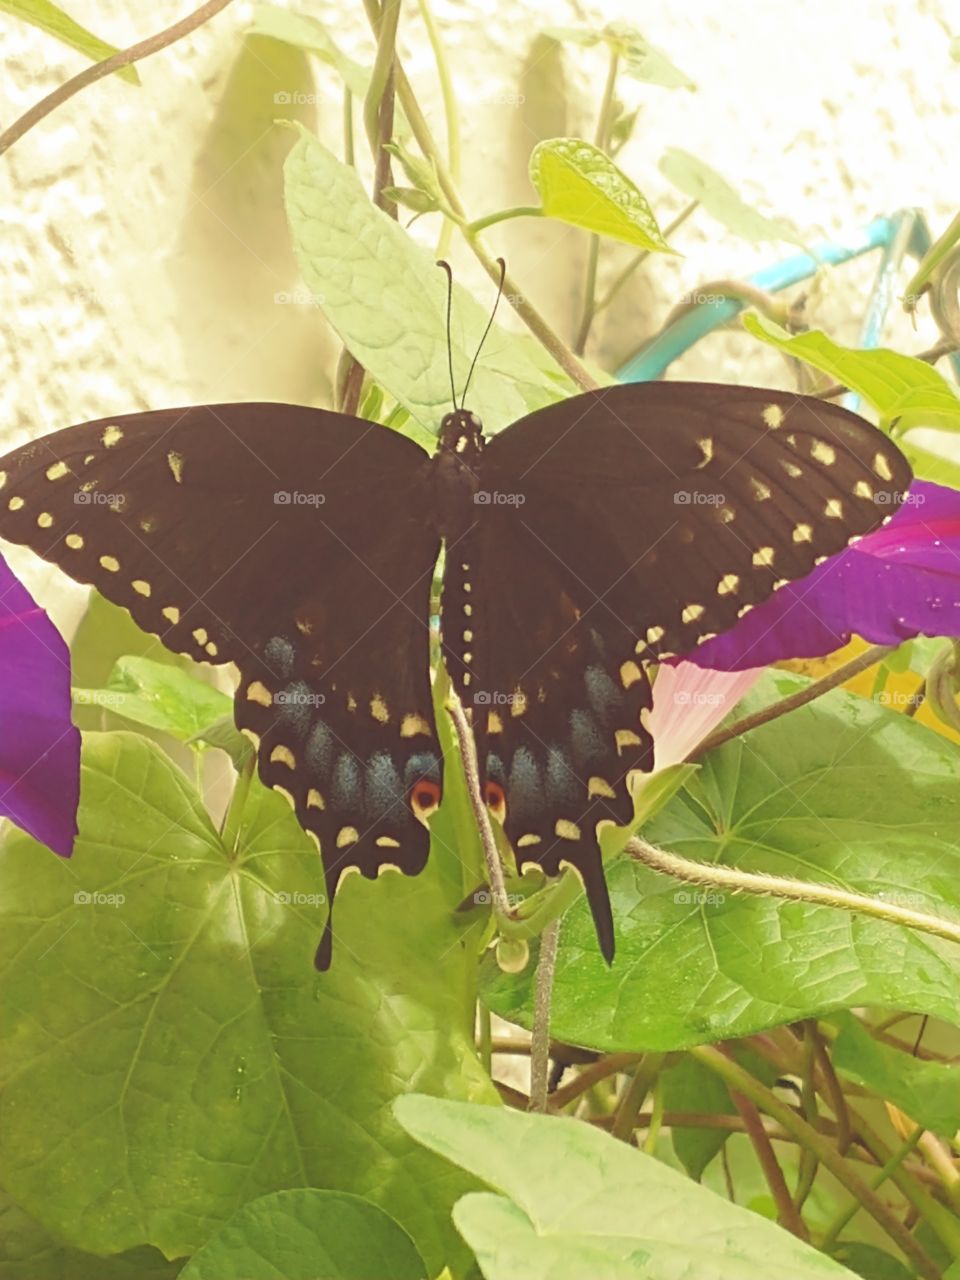 black swallow tailed butterfly